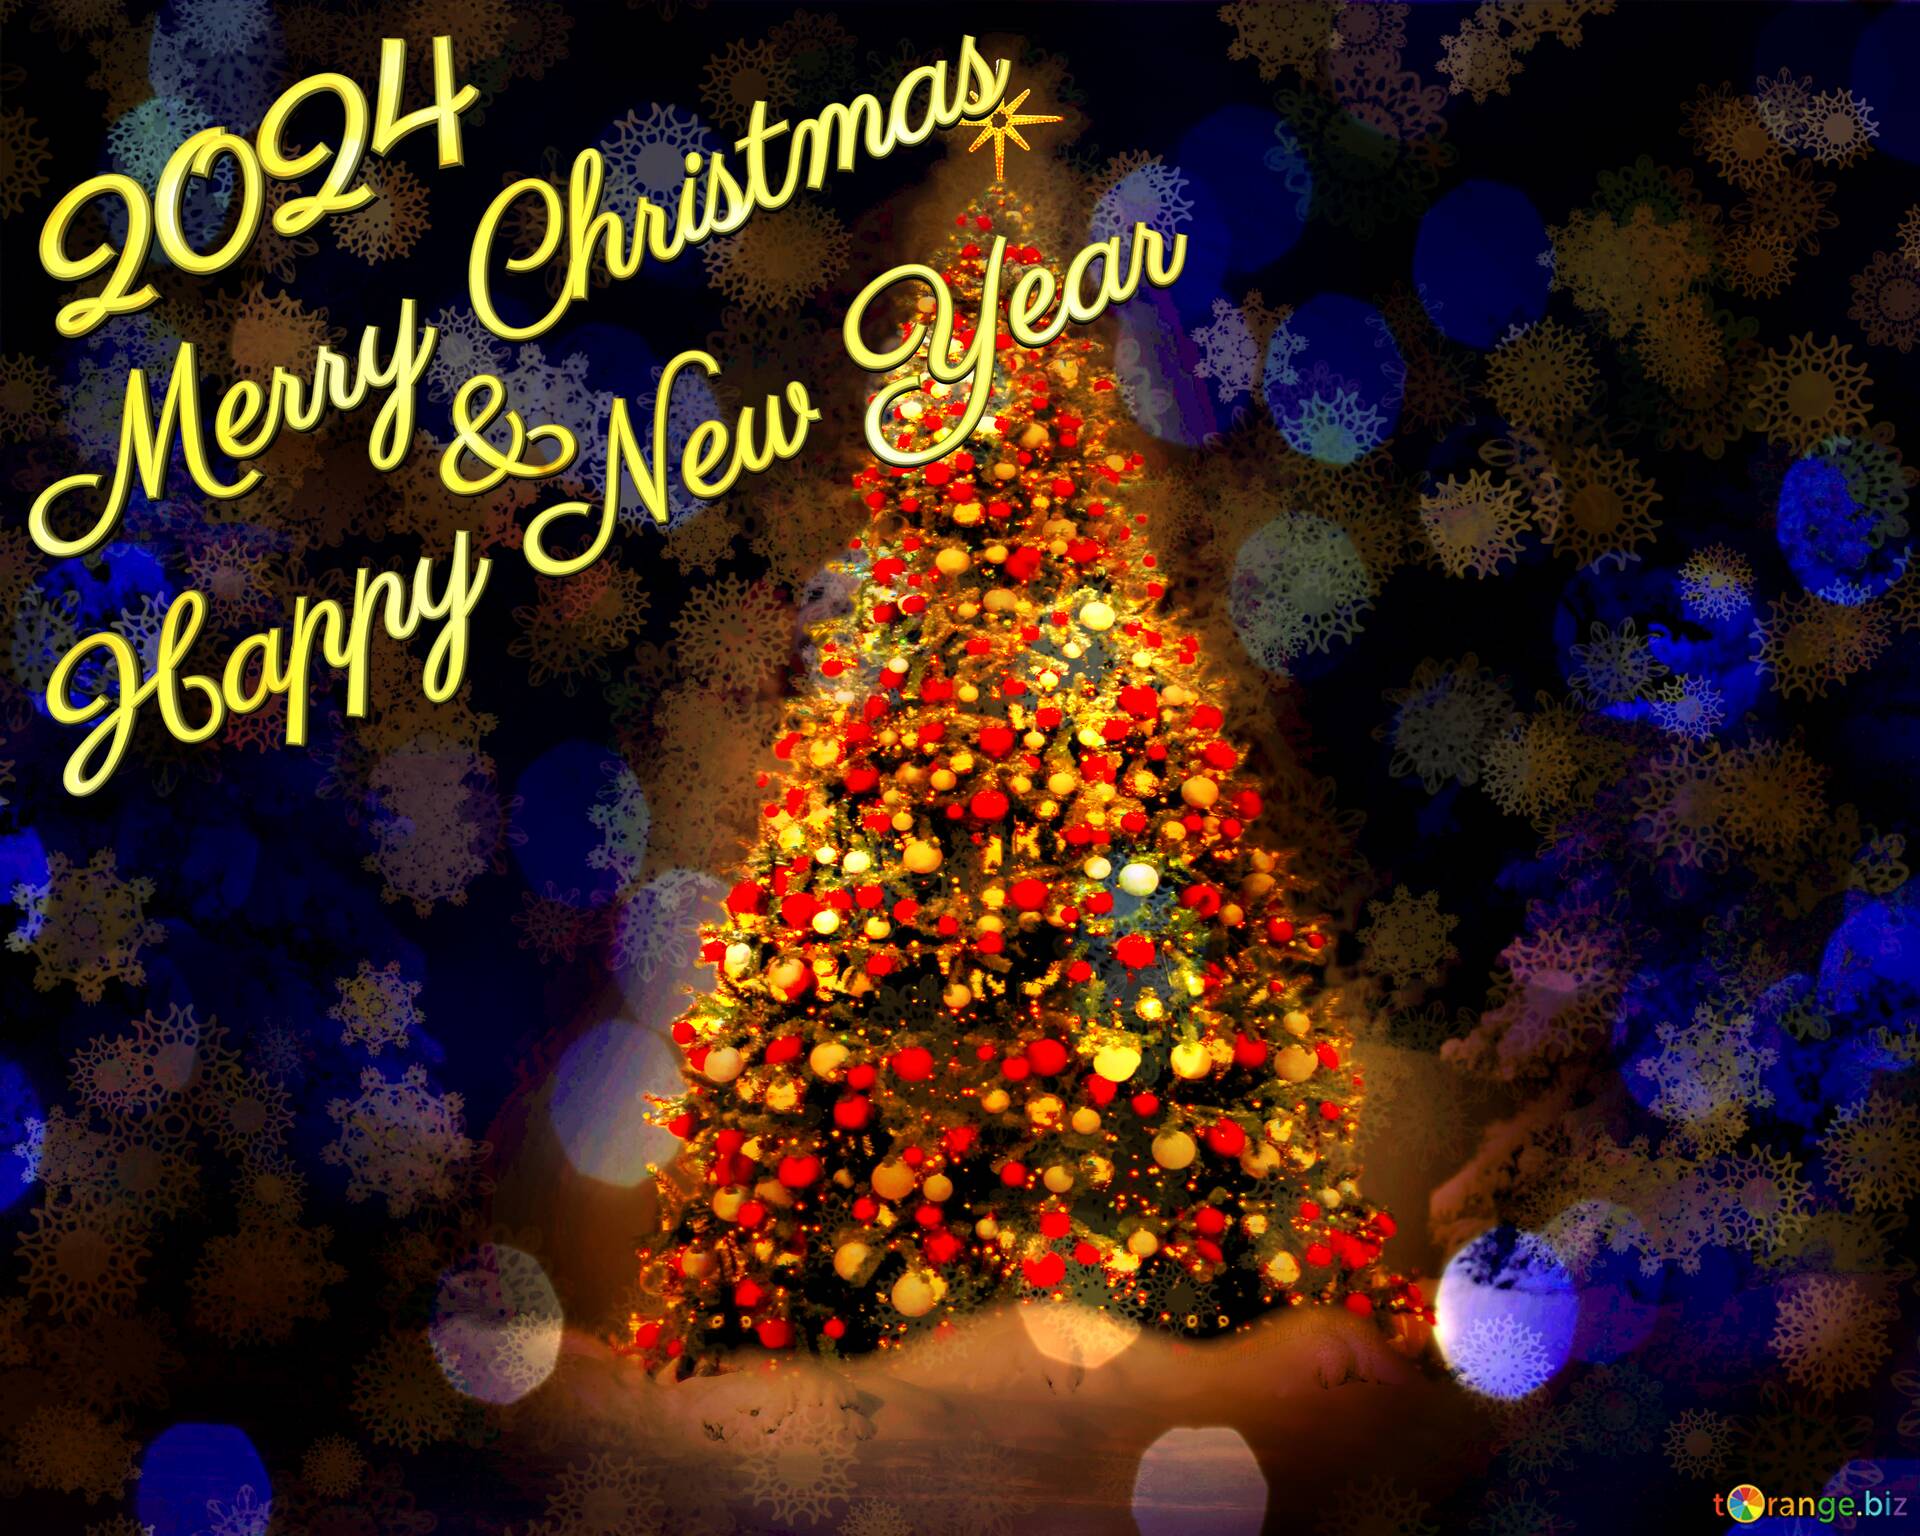 Merry Christmas Wishes 2022 Hd Images Greetings Torange Christmasopencloud